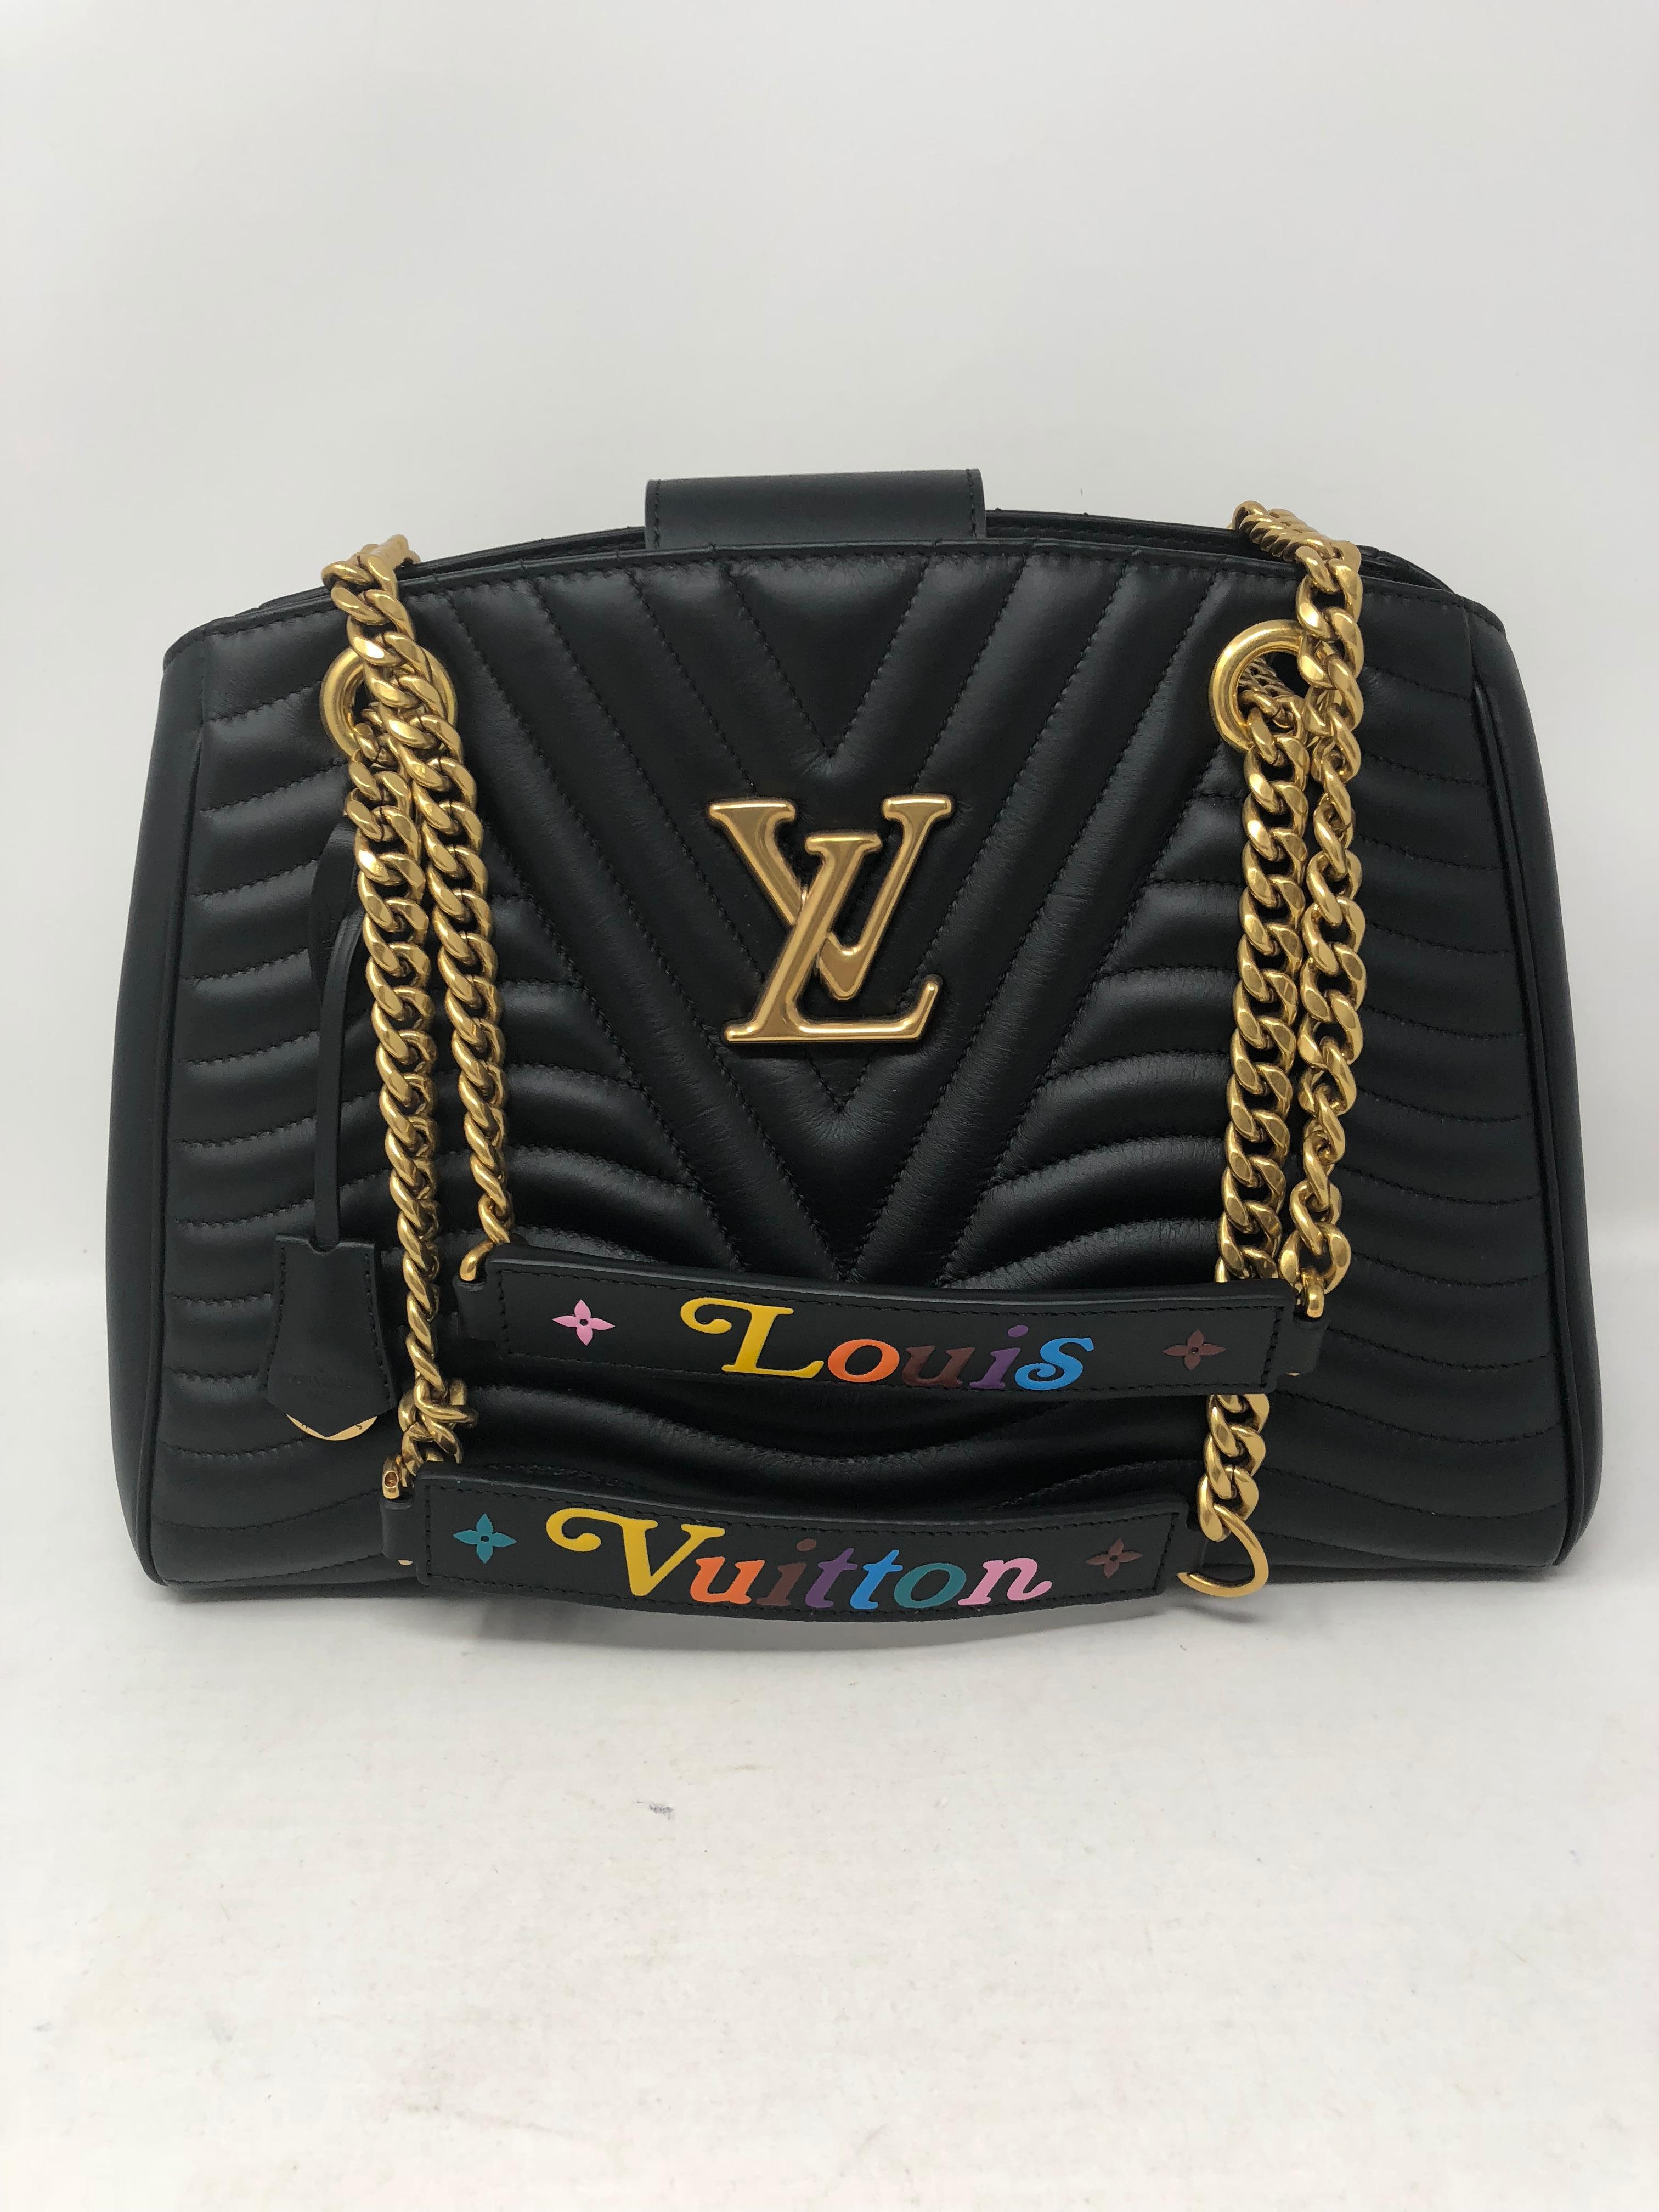 Louis Vuitton New Wave Chain Tote in Black with rainbow letters. Brand new and limited. Never used. Nice roomy tote. Gold hardware. Includes dust cover and box. Guaranteed athentic.